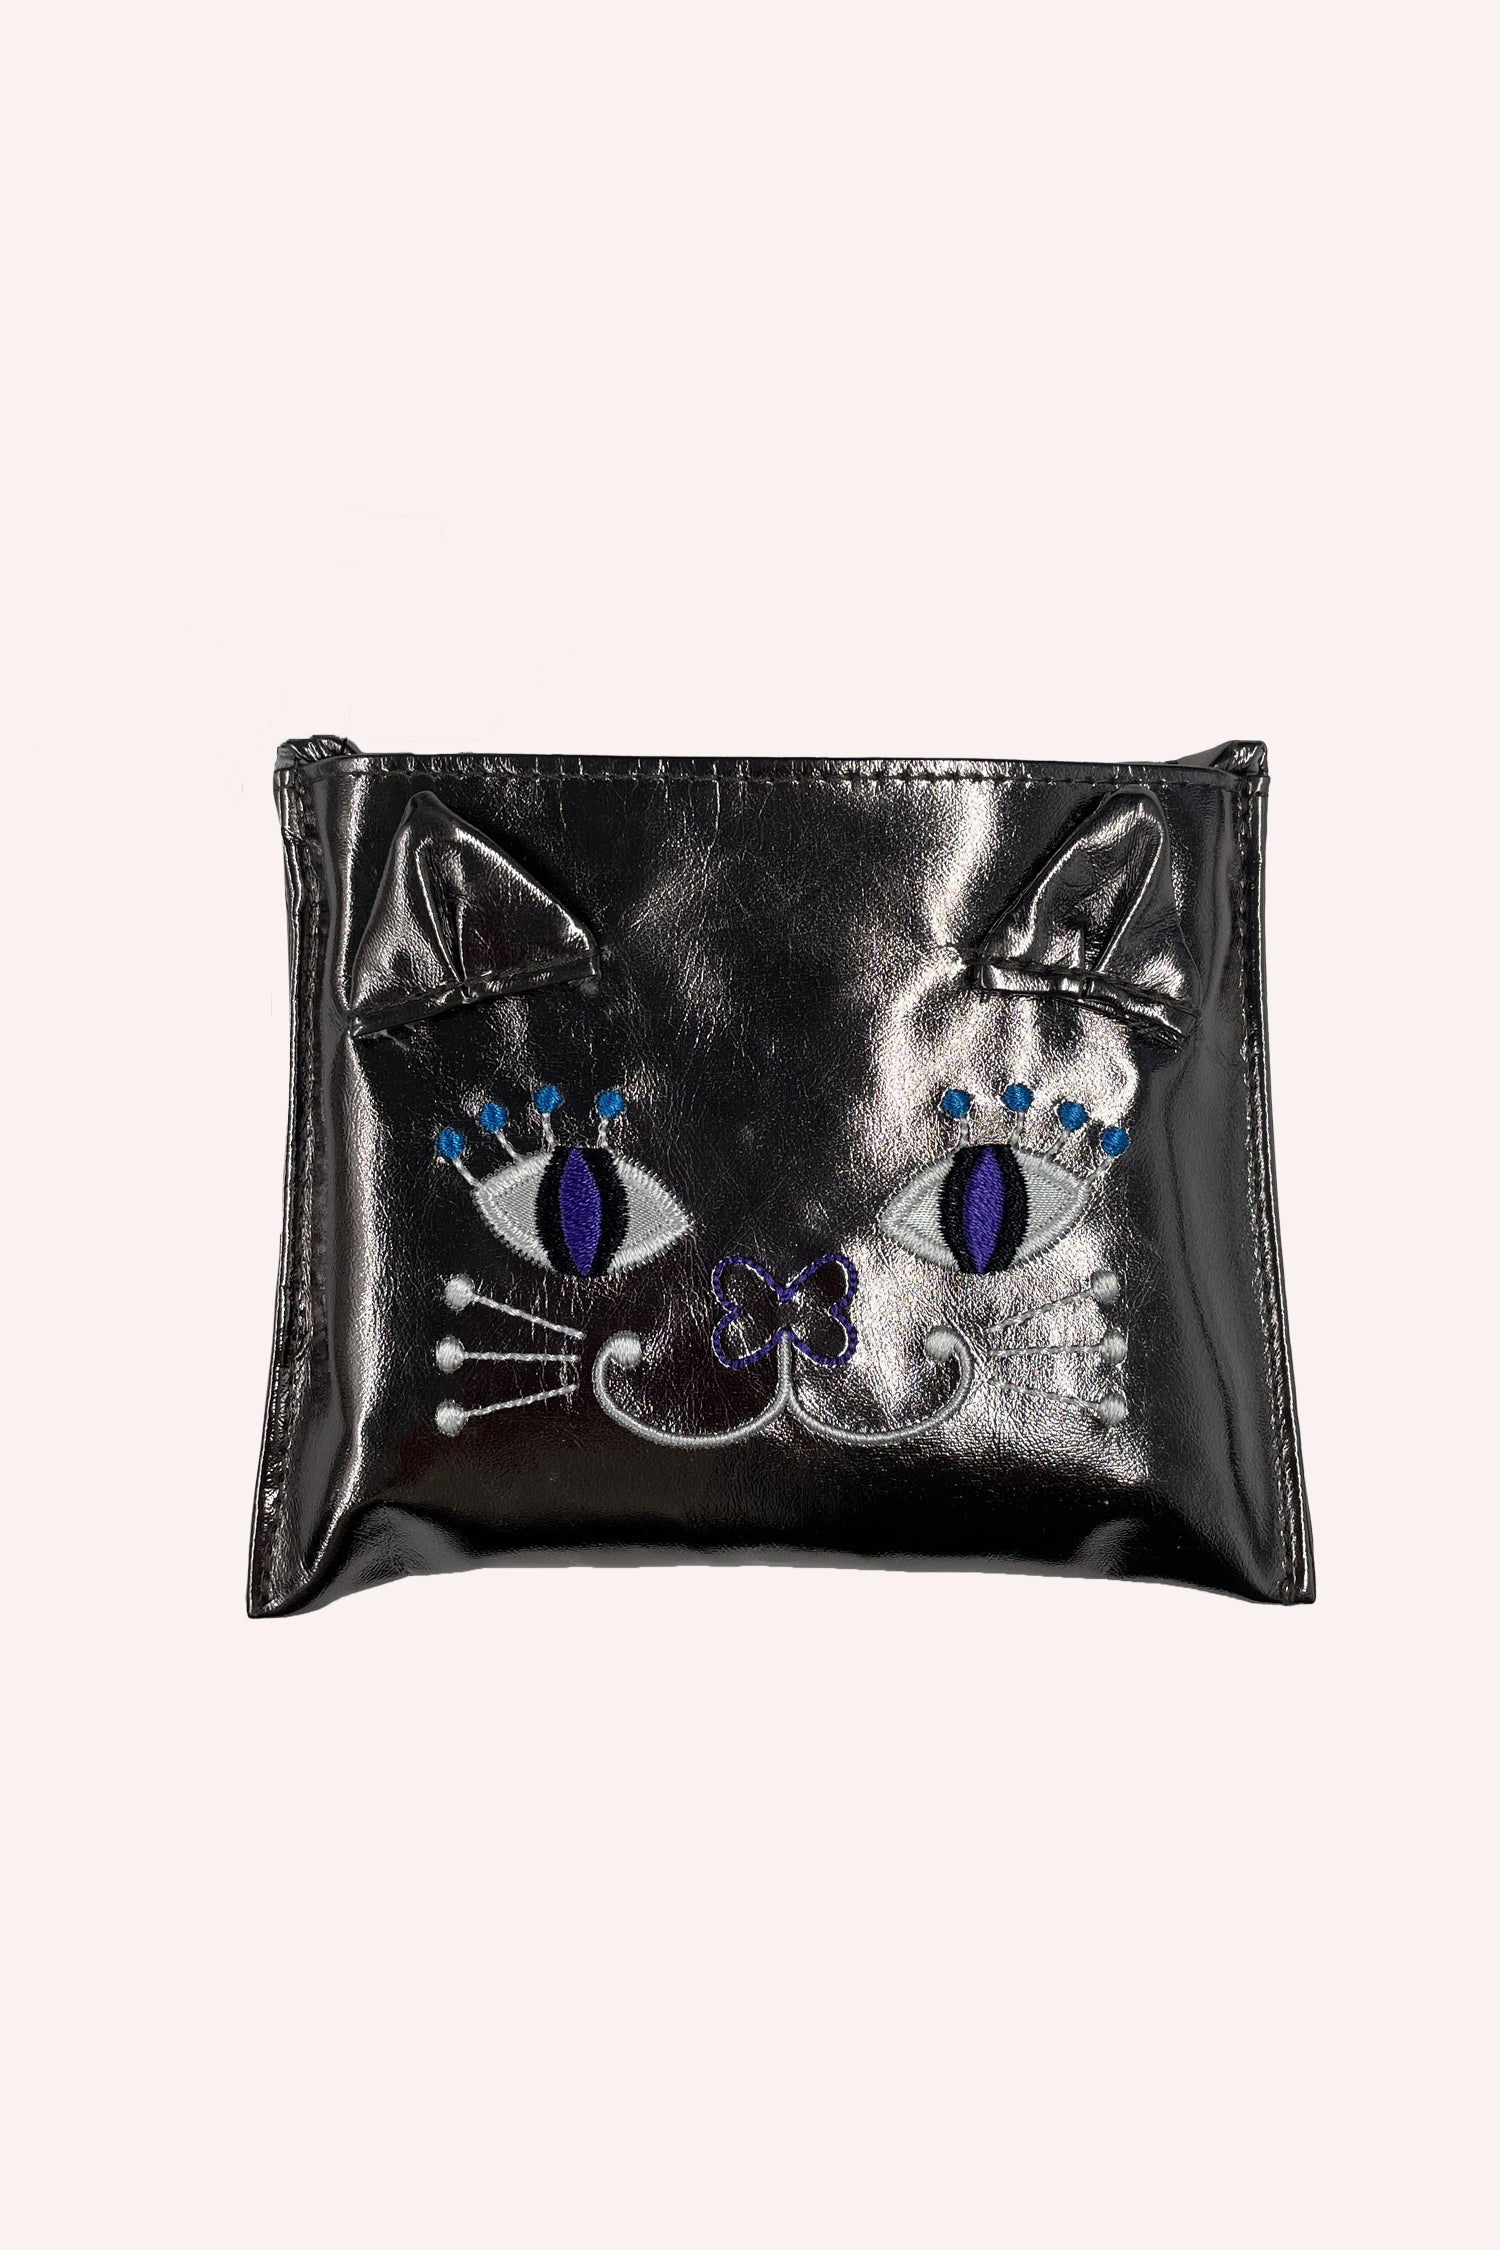 Cat Tote Bag, black Synthetic leather, stylized cat on front, white seams, purple eyes, blue dots